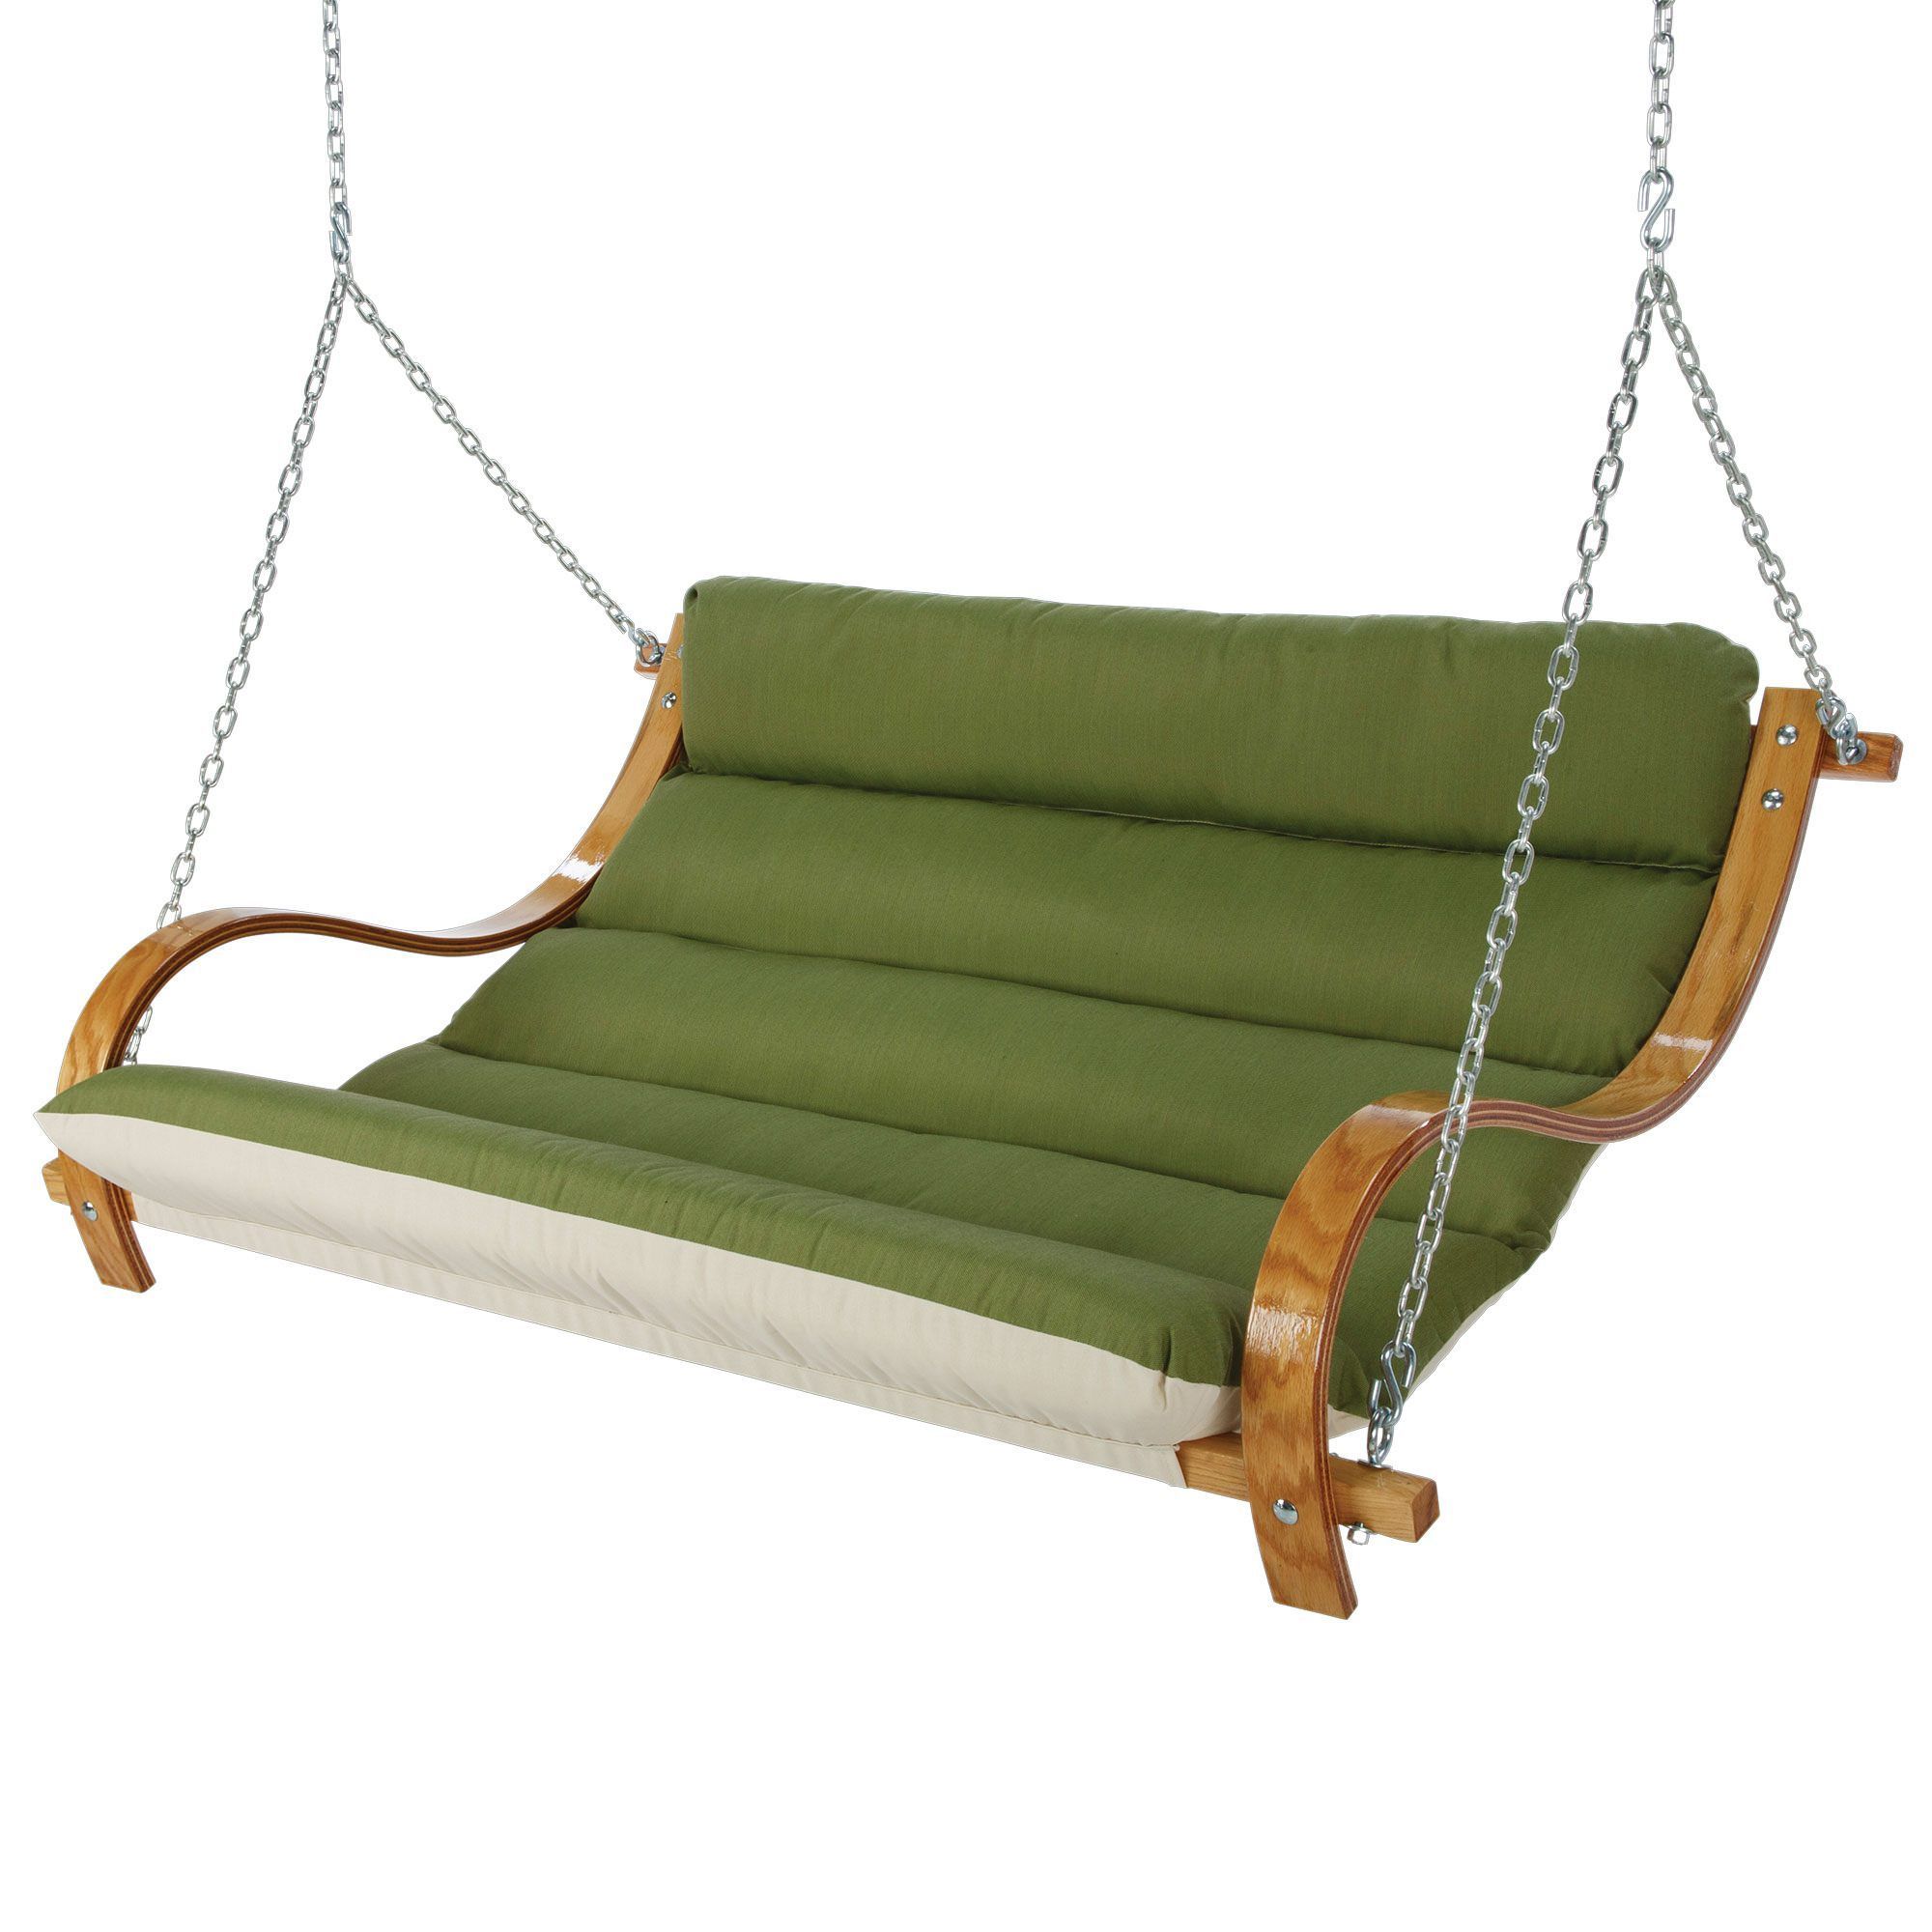 Deluxe Cushioned Double Swing Made With Sunbrella – Spectrum For Deluxe Cushion Sunbrella Porch Swings (View 2 of 25)